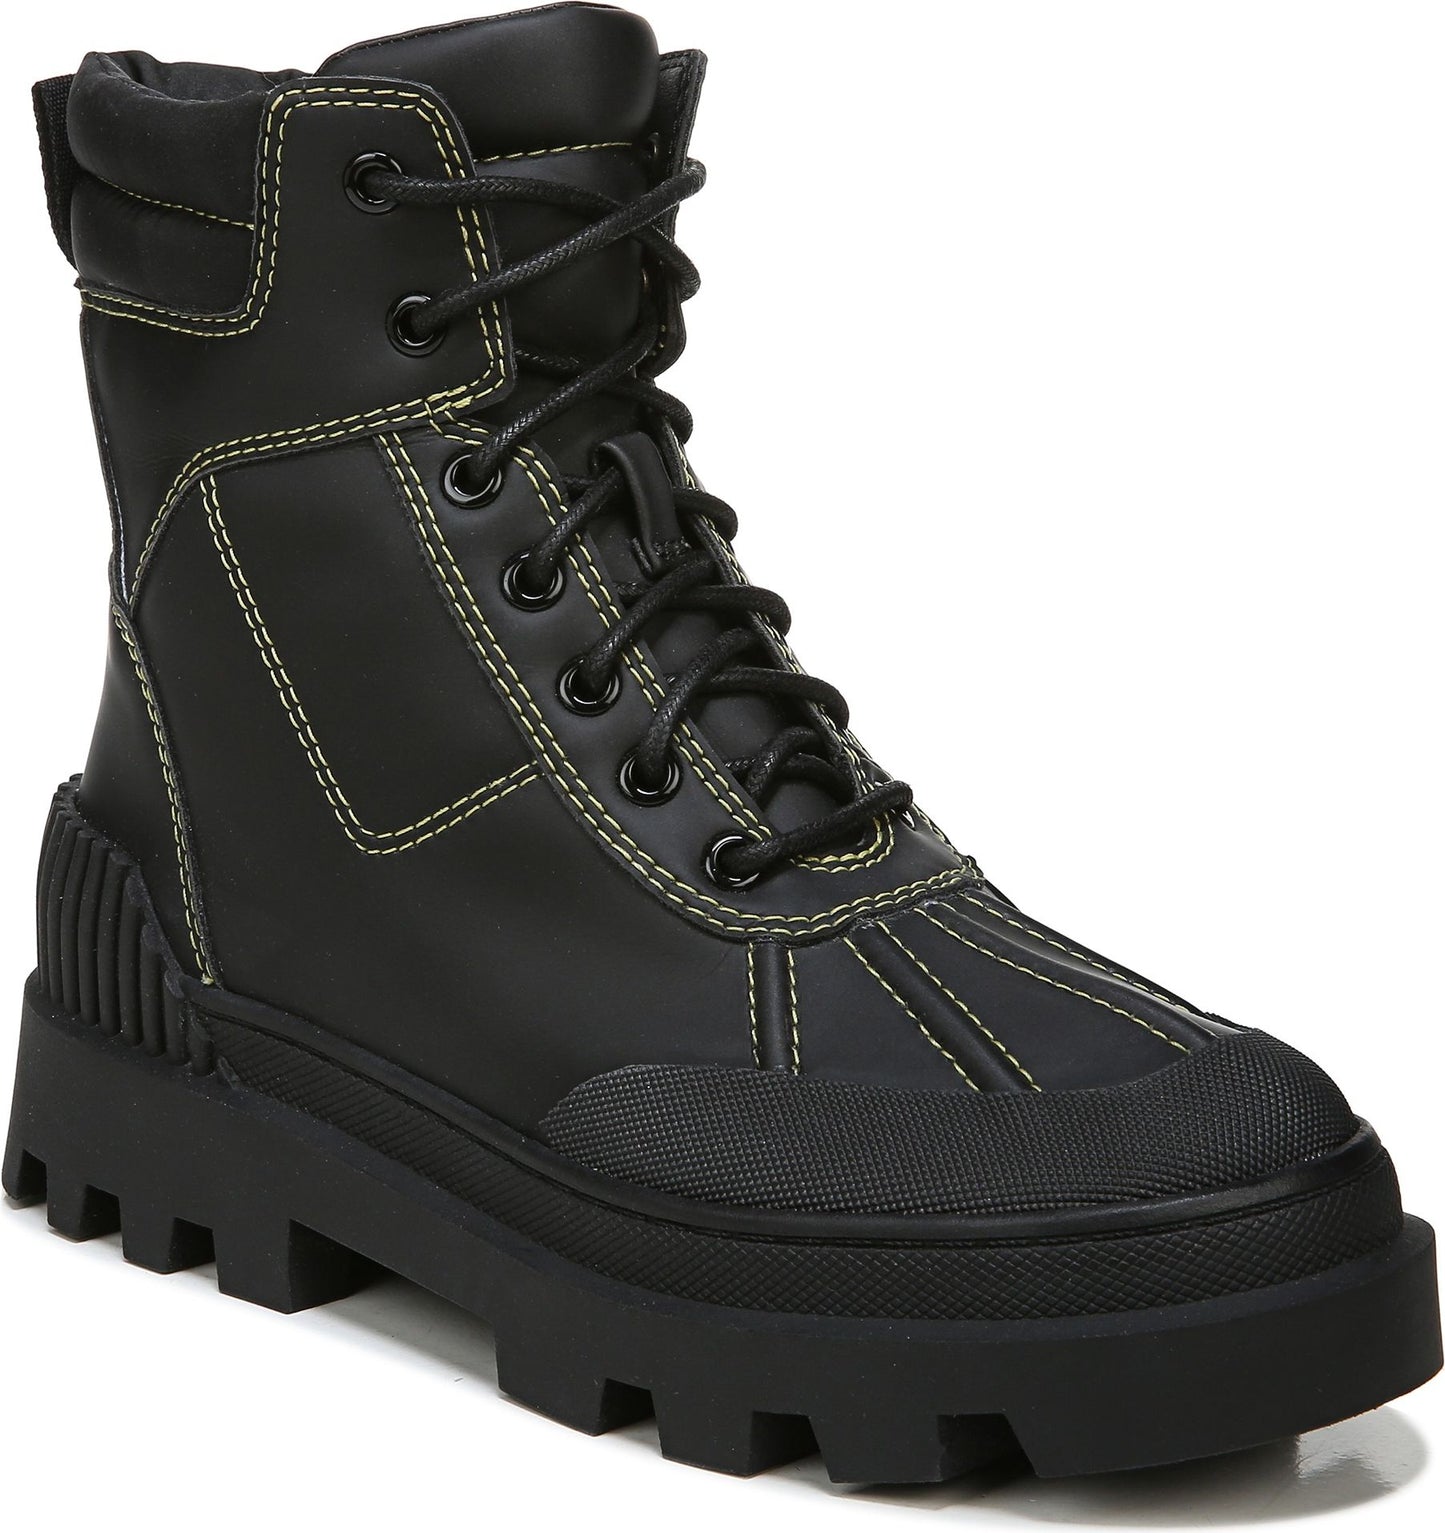 Circus by Sam Edelman Boots Isabelle Waterproof Black